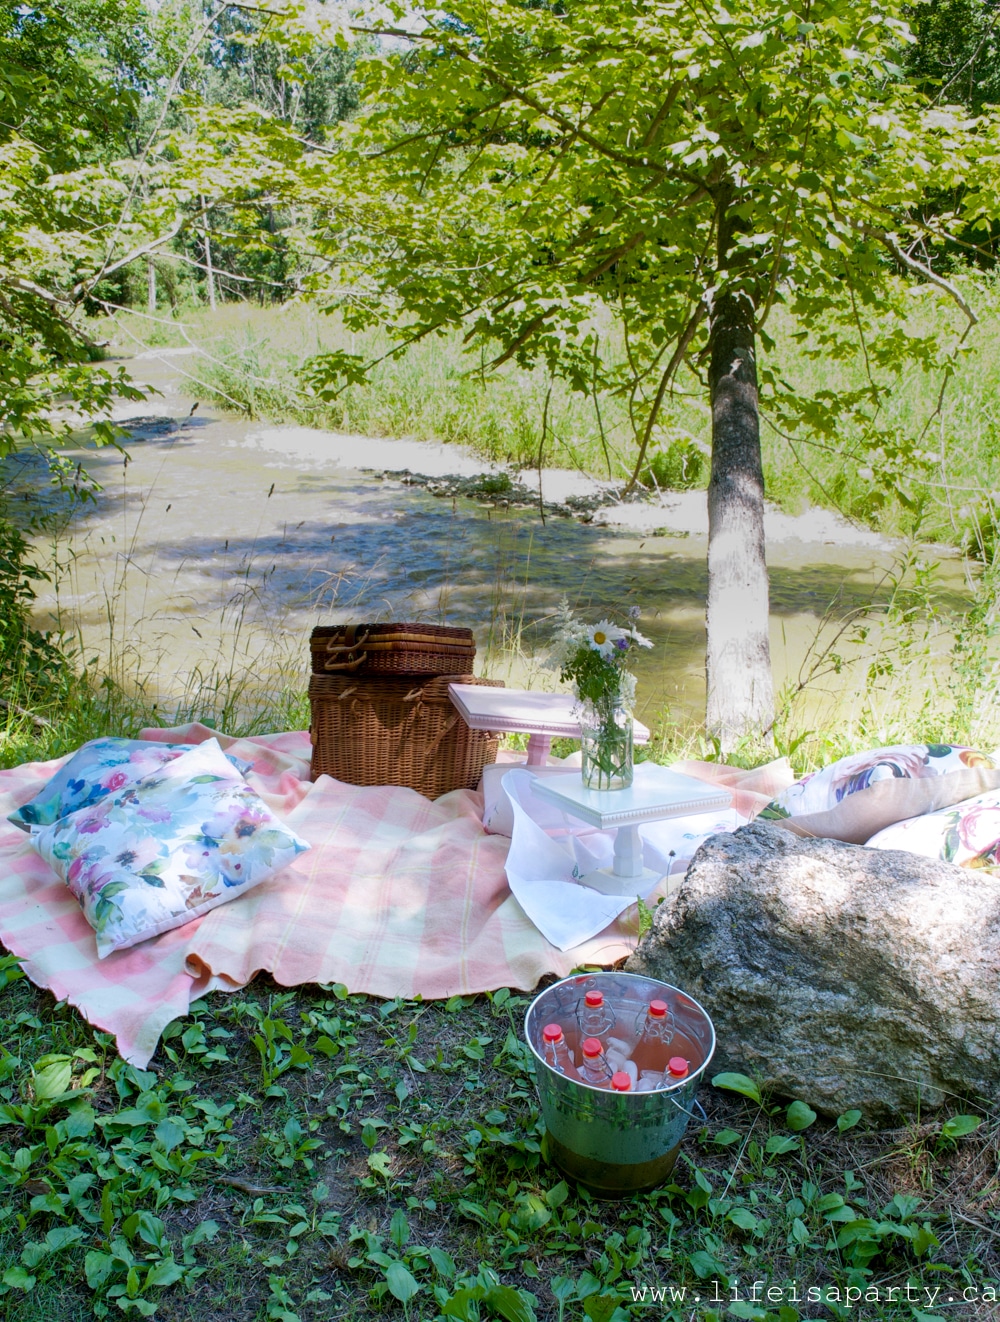 setting up a picnic beside a river